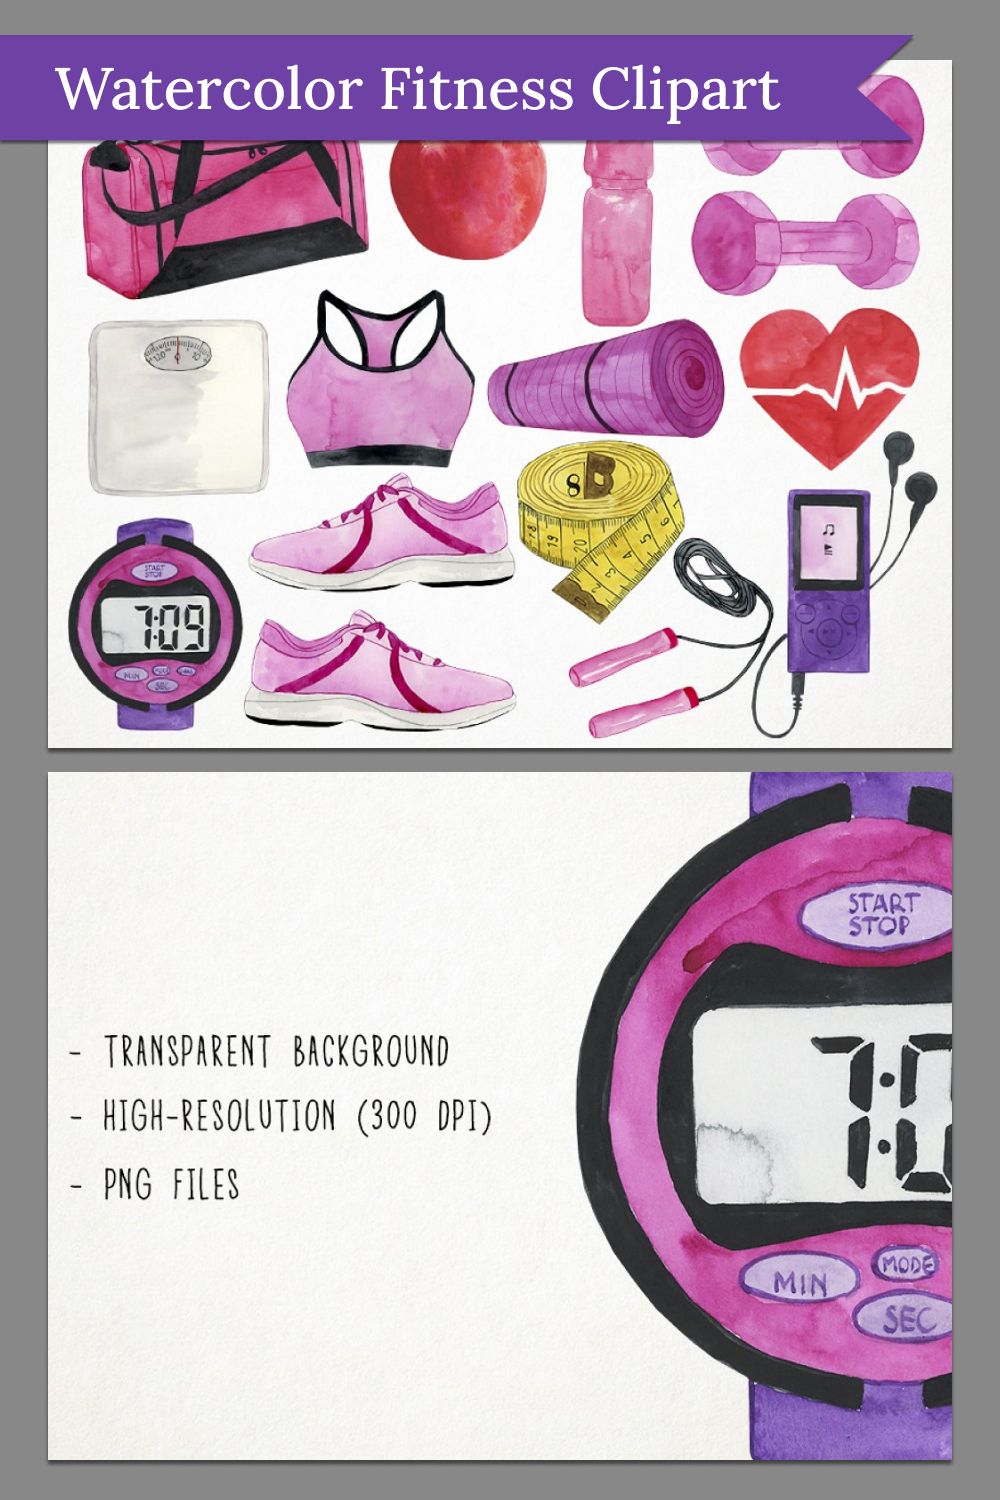 Watercolor fitness clipart of pinterest.